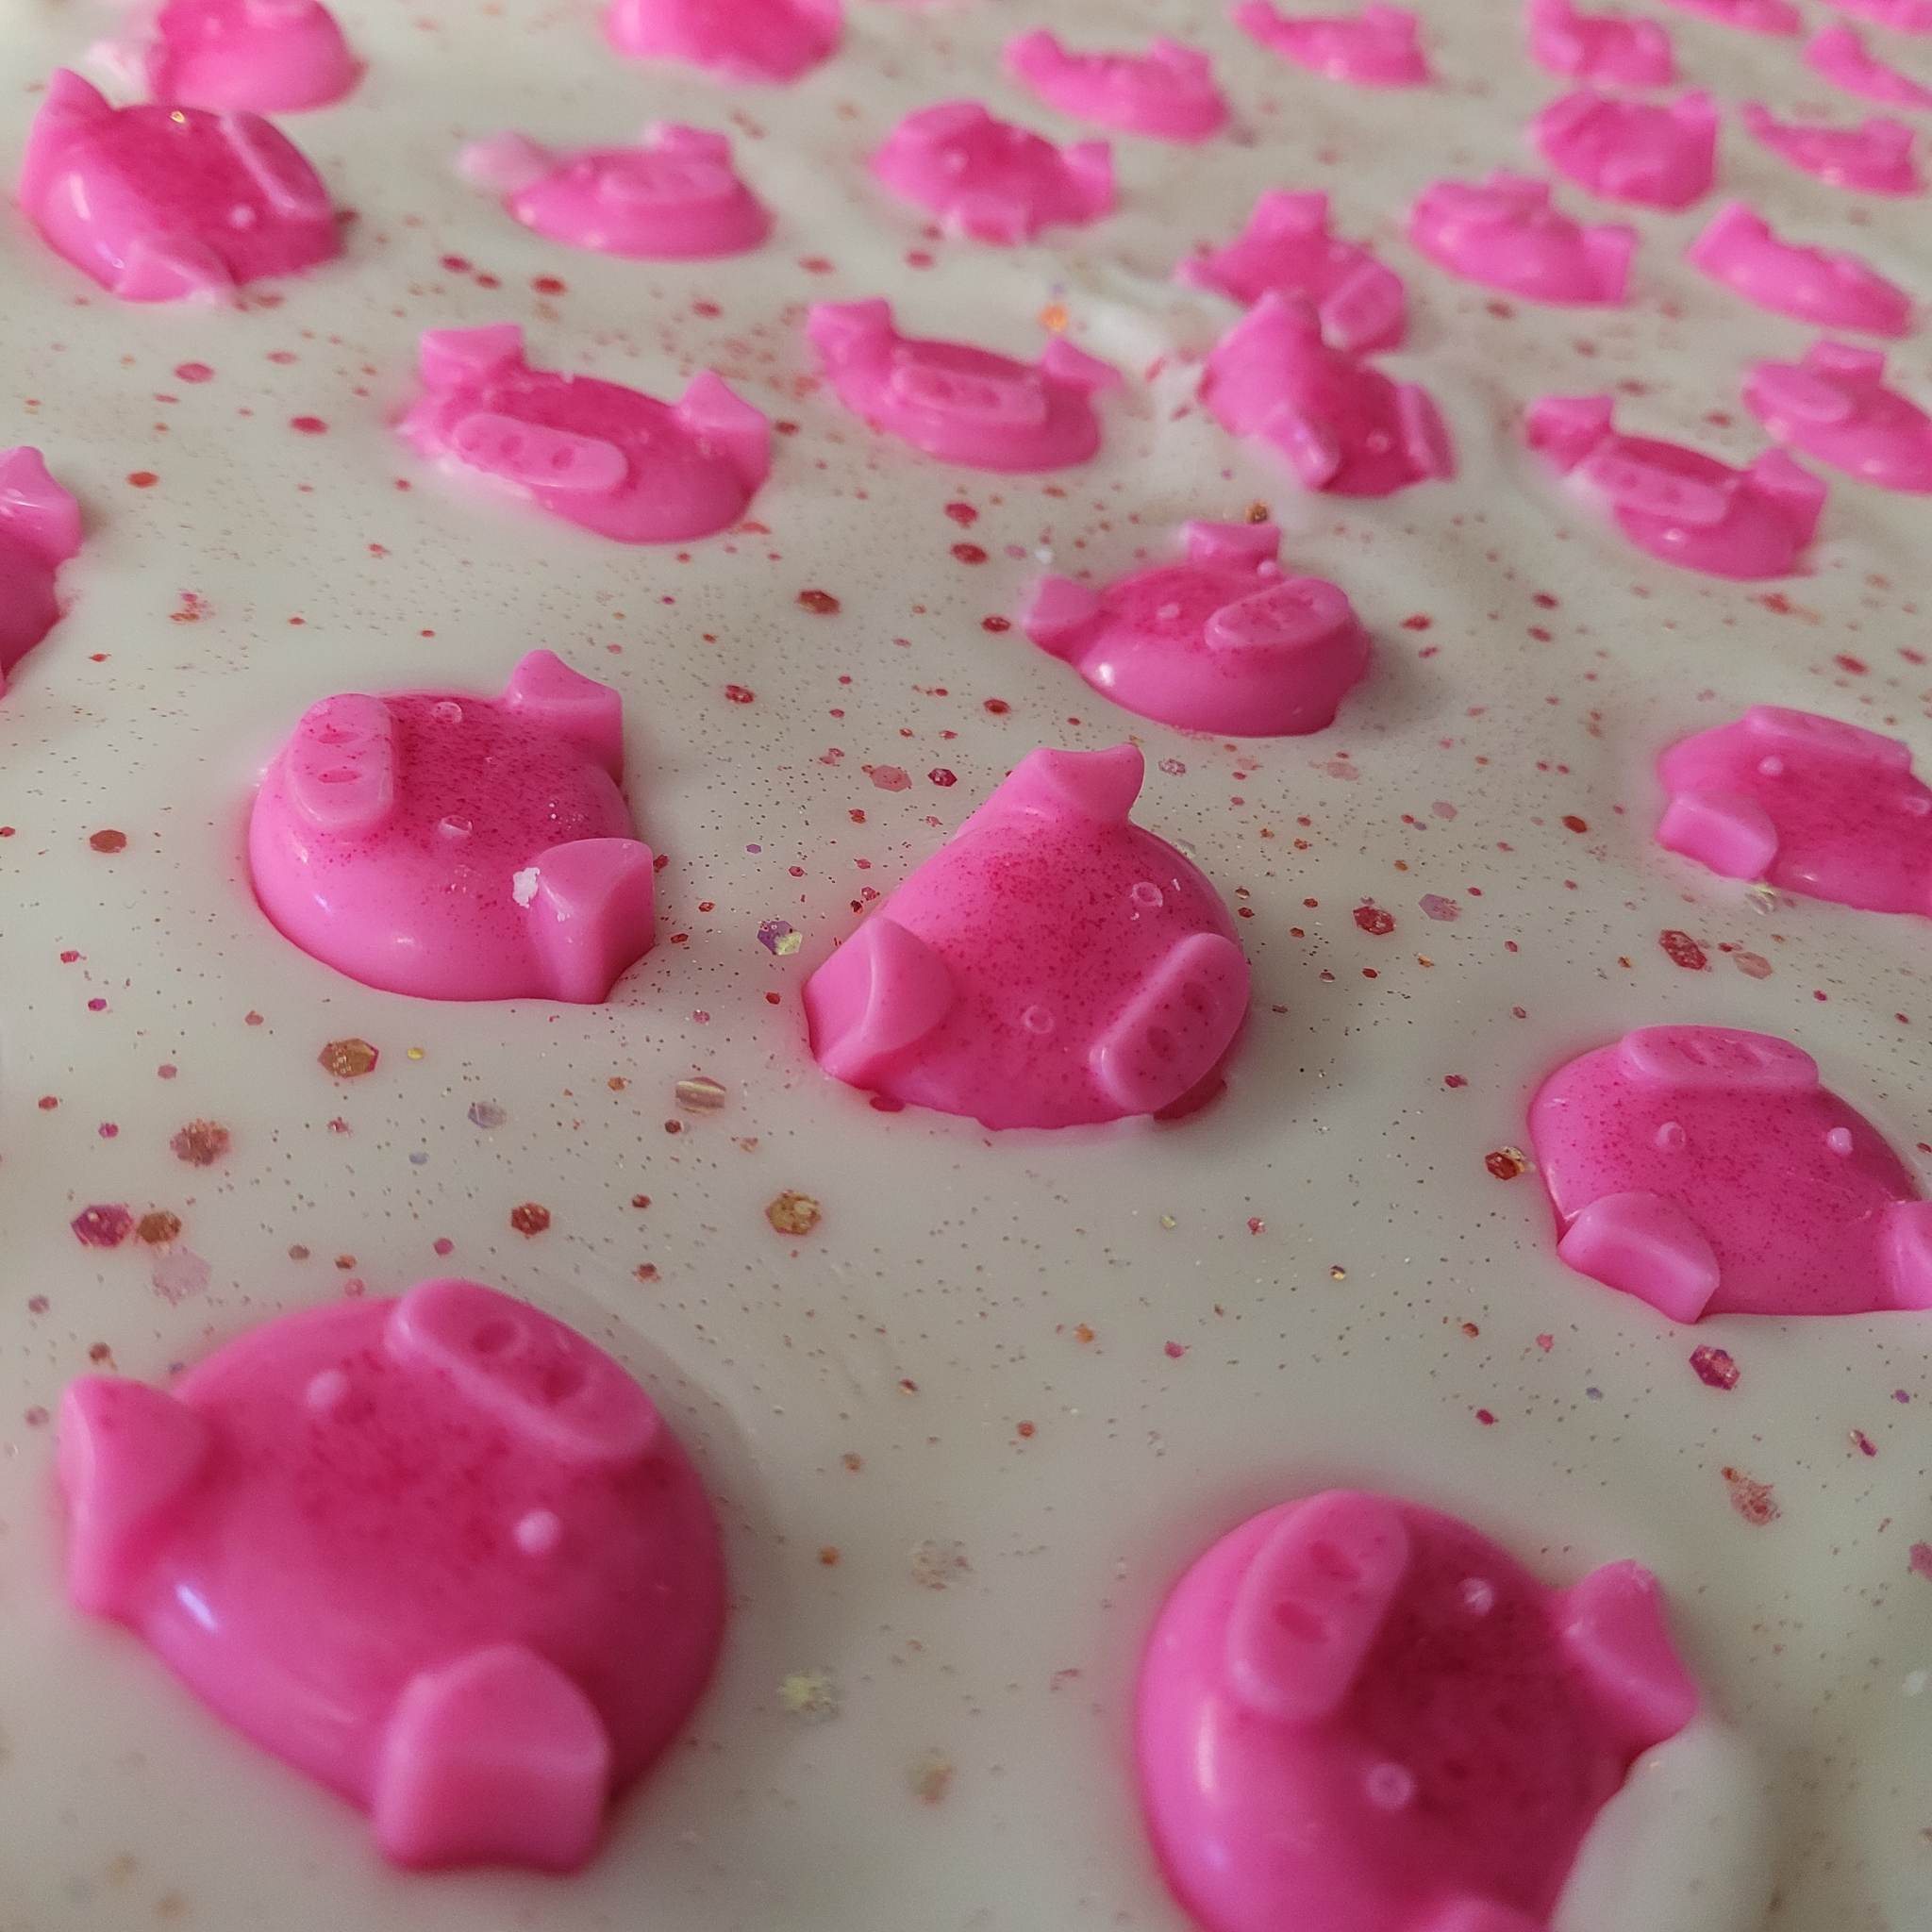 Limited Edition Strawberries & Cream Wax Melt Crumble